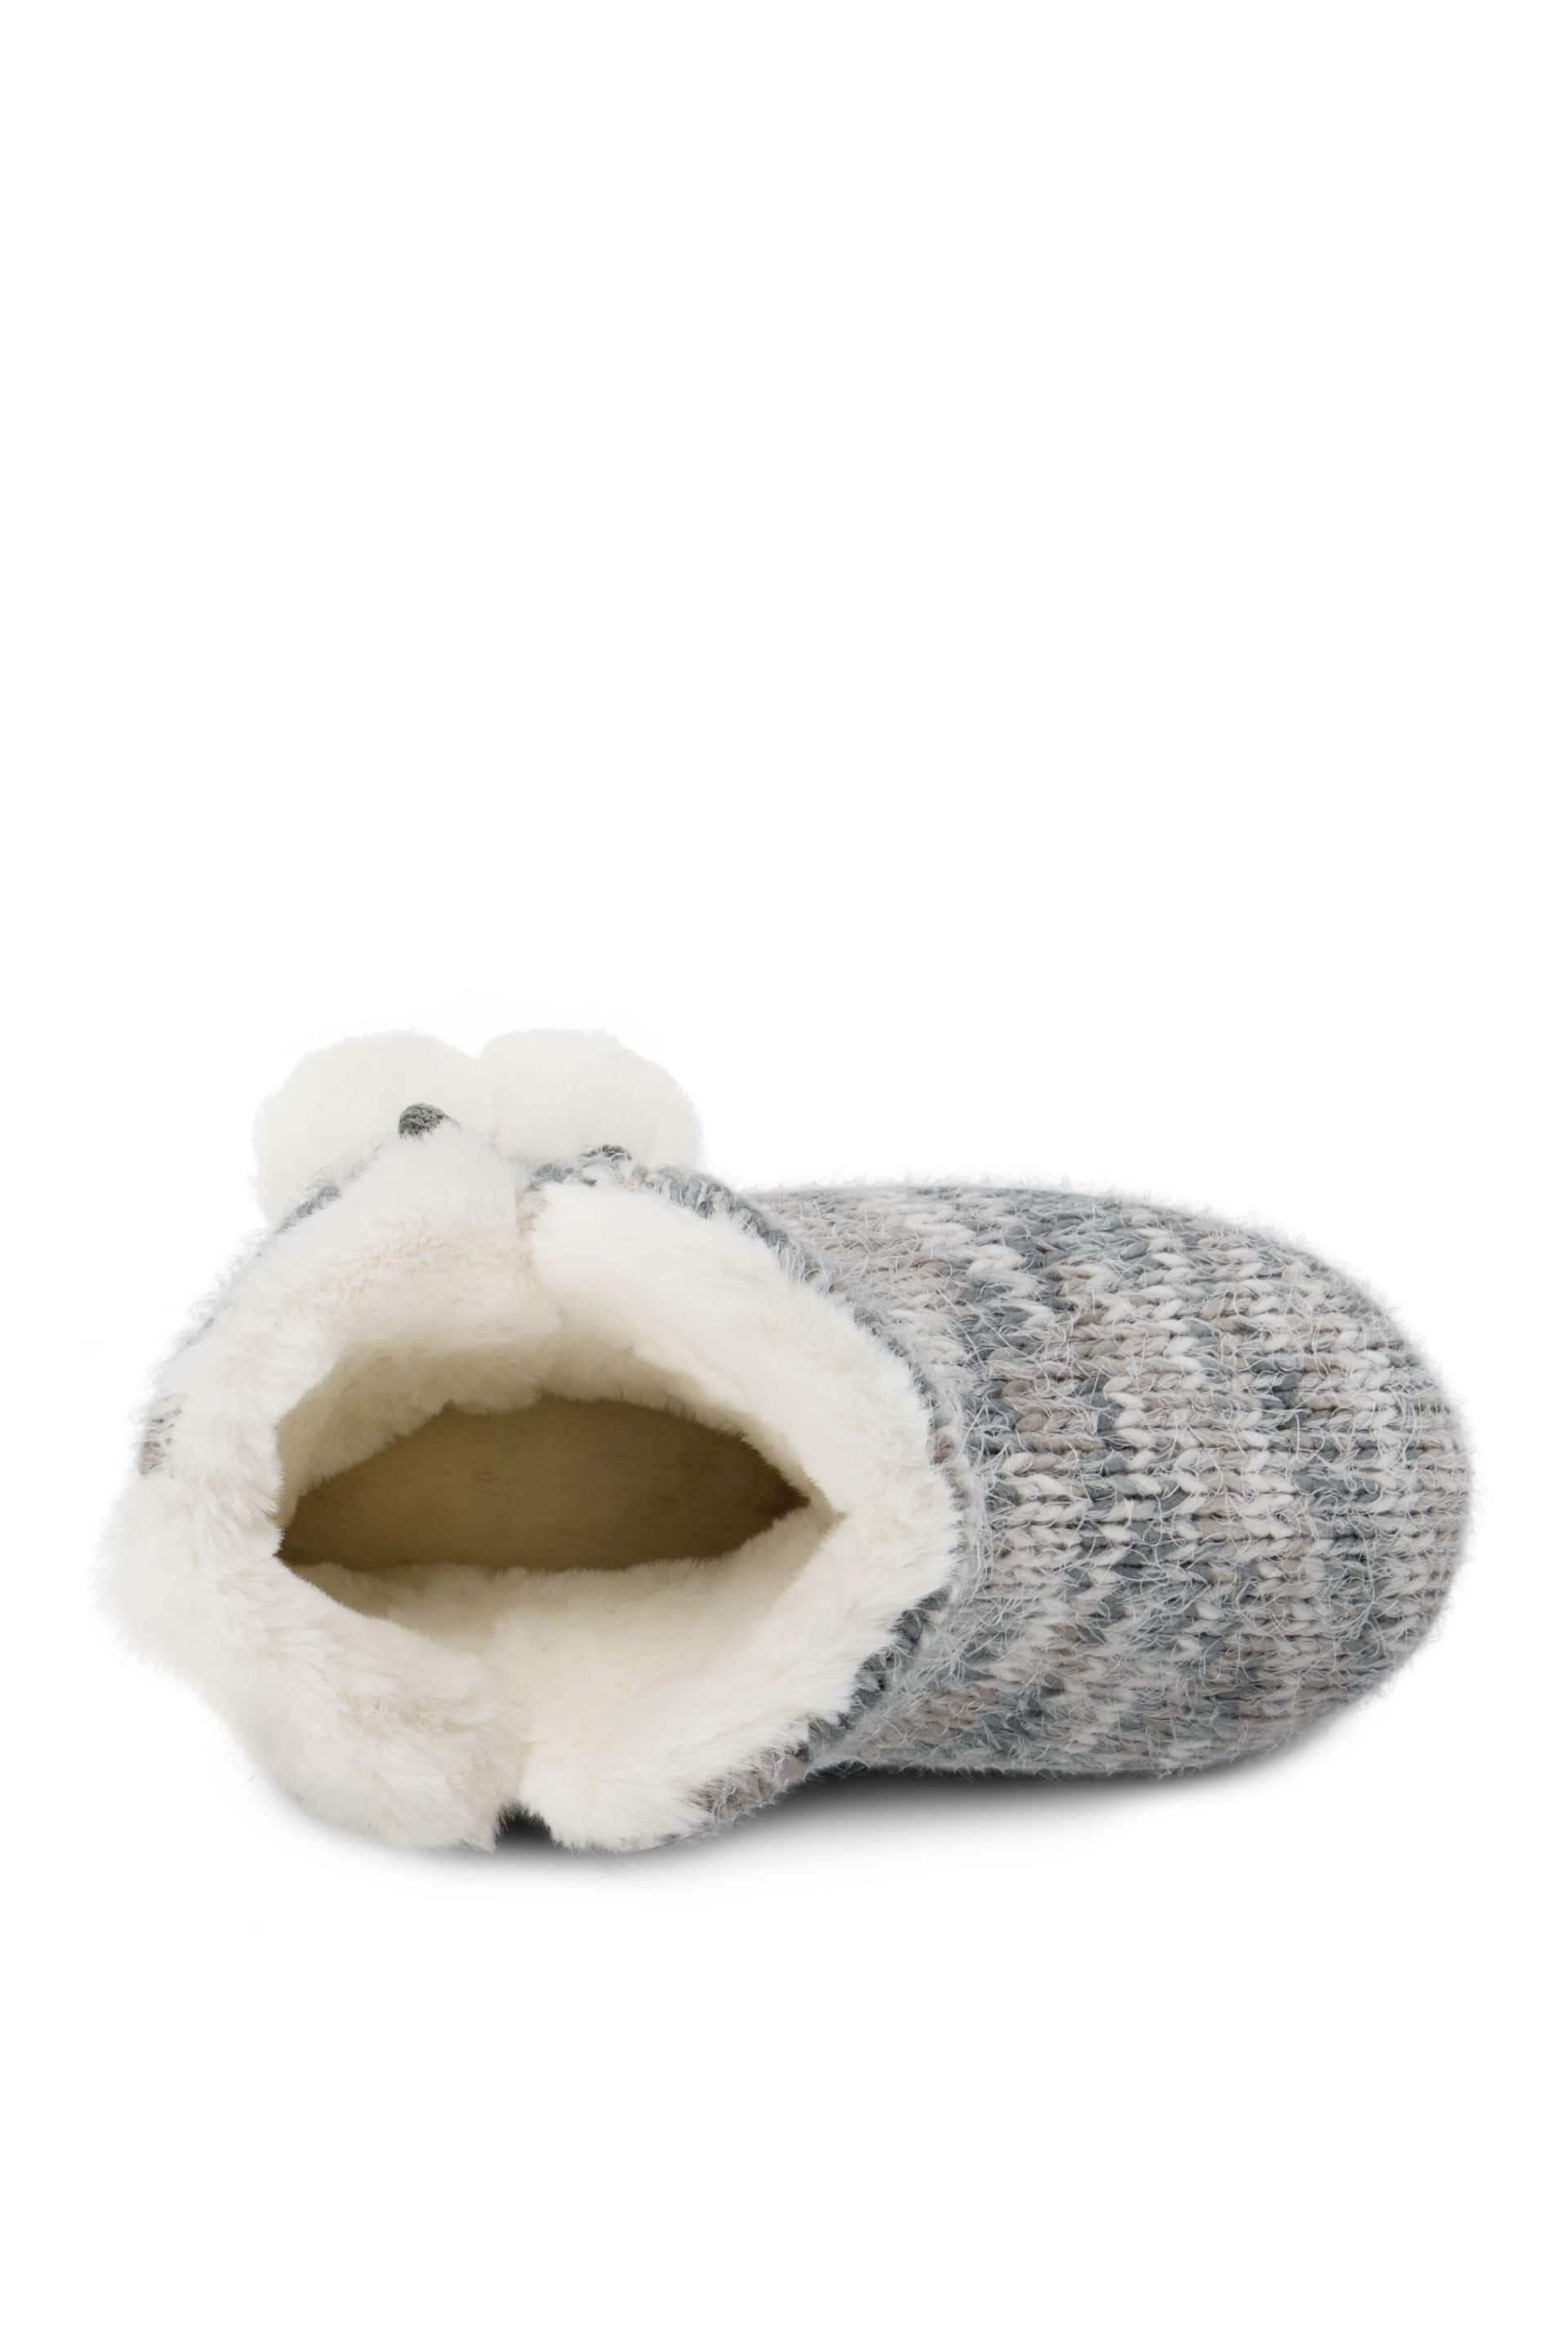 Totes Grey Ladies Knitted Boot Slippers With Pom Pom - Image 4 of 5